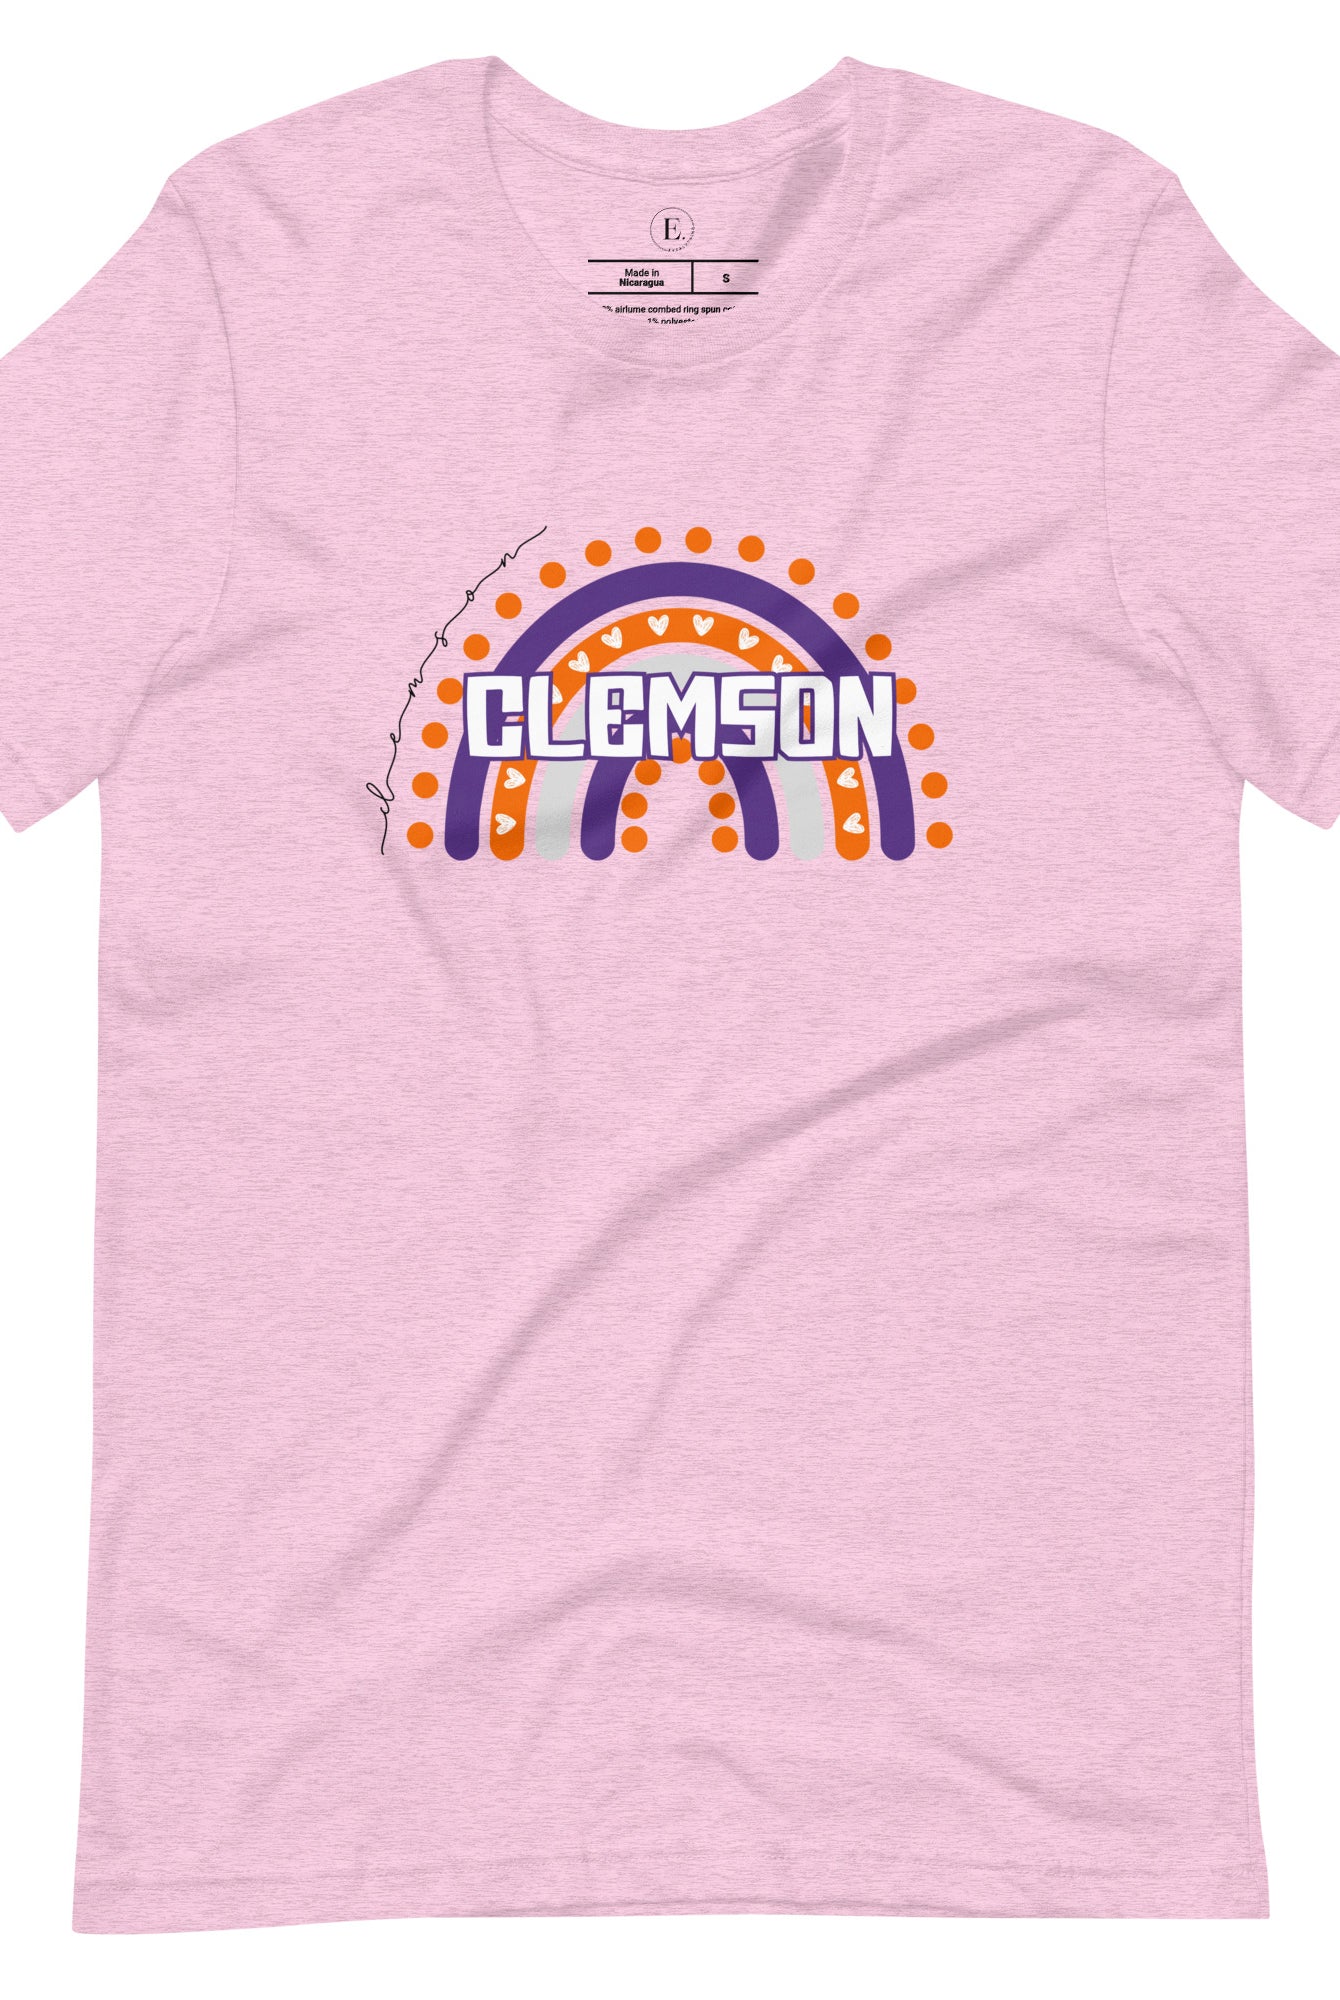 Celebrate your love for Clemson University with our colorful college t-shirt that showcases the beautiful Clemson colors that creates a stunning rainbow backdrop, with the schools name atop a pink shirt.